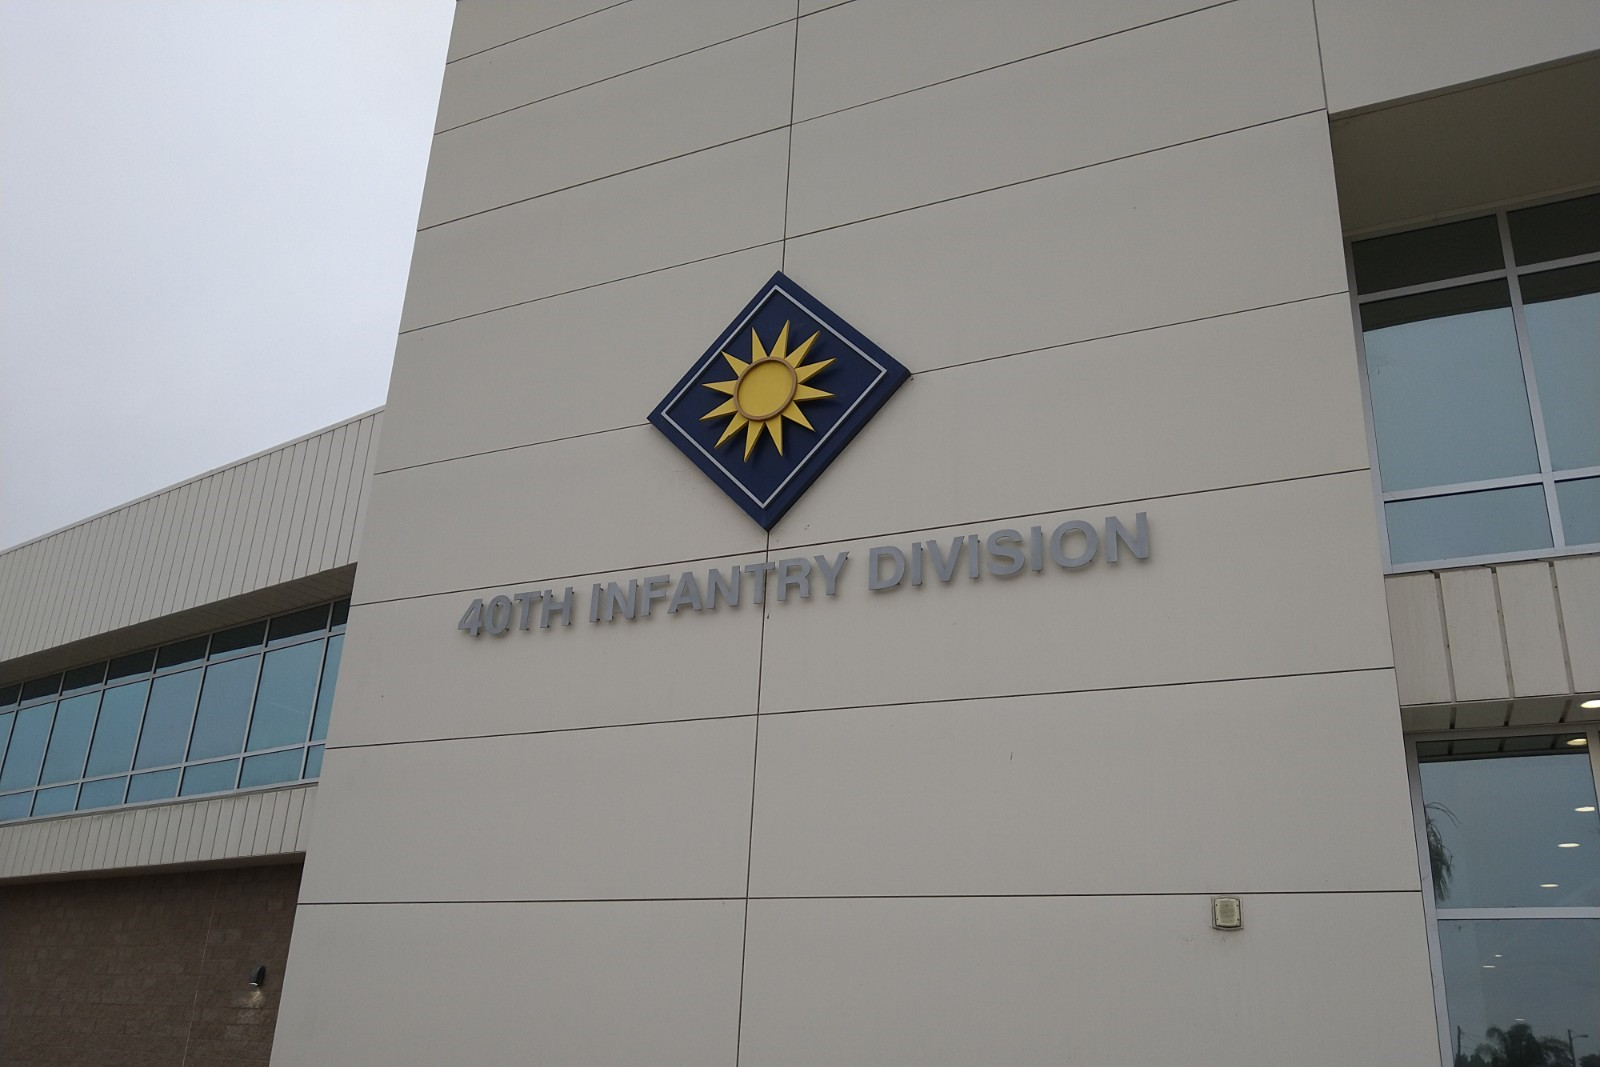 40th Infantry Division building